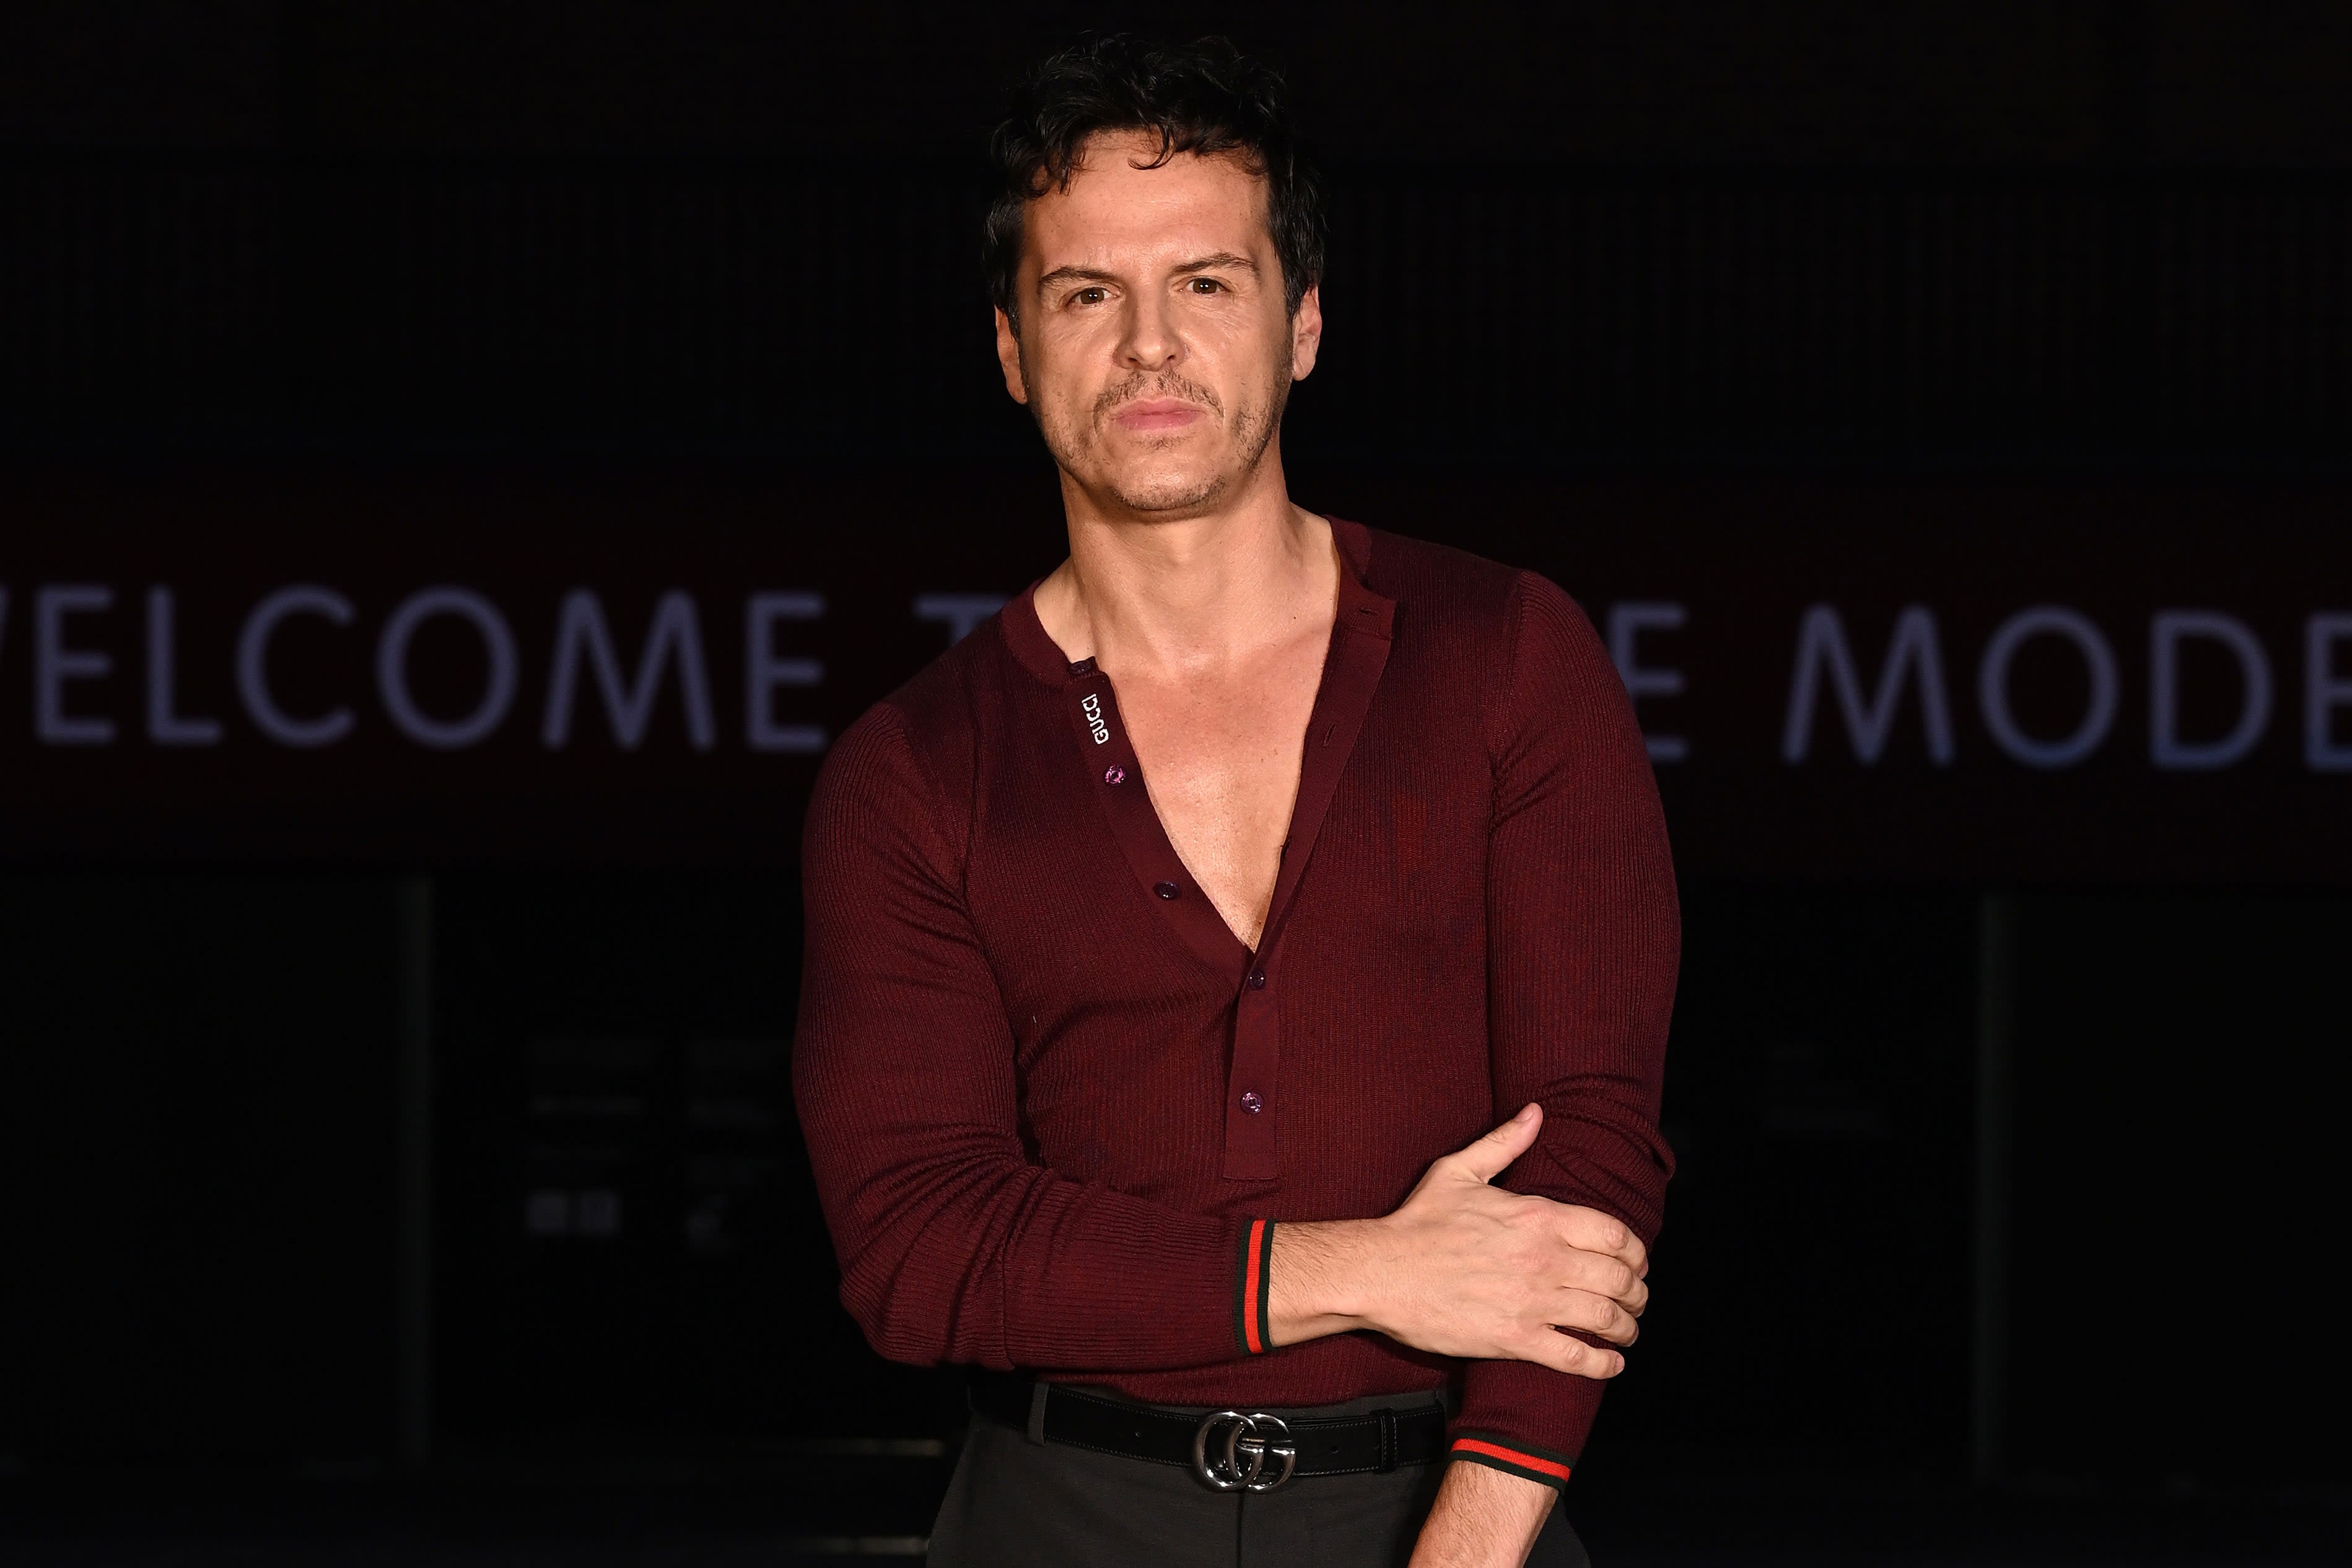 Andrew Scott Doesn’t Want to You to Call Him “Openly Gay”